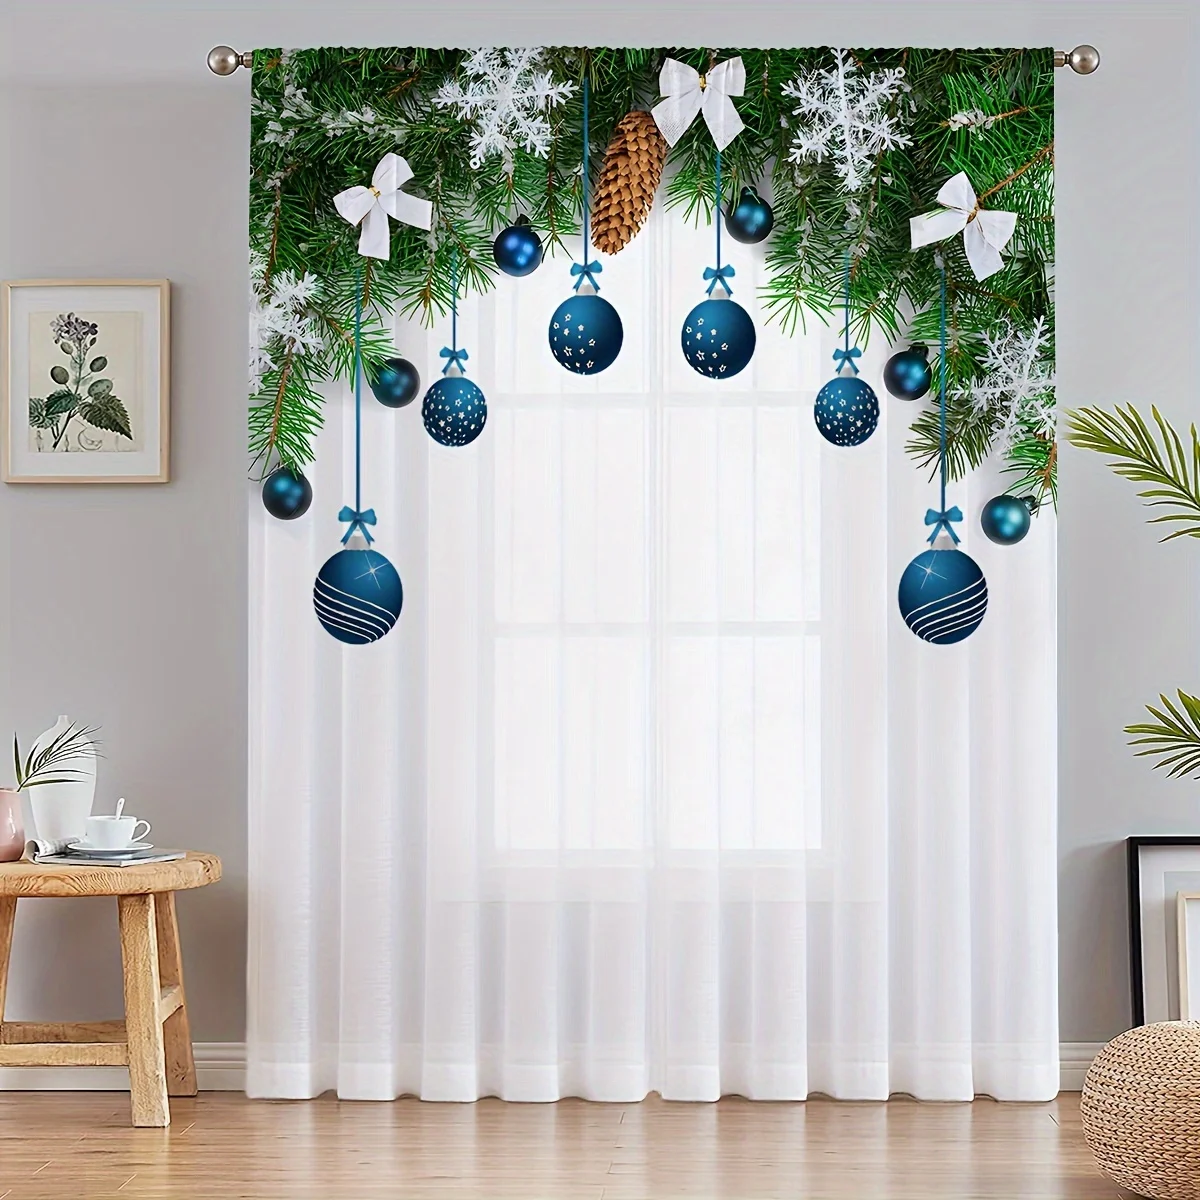 

2pcs Snowflake Pine Branch White Bow Curtain Sheer Curtain Christmas Holiday Decor For Living Room Bedroom Kitchen Home Decor